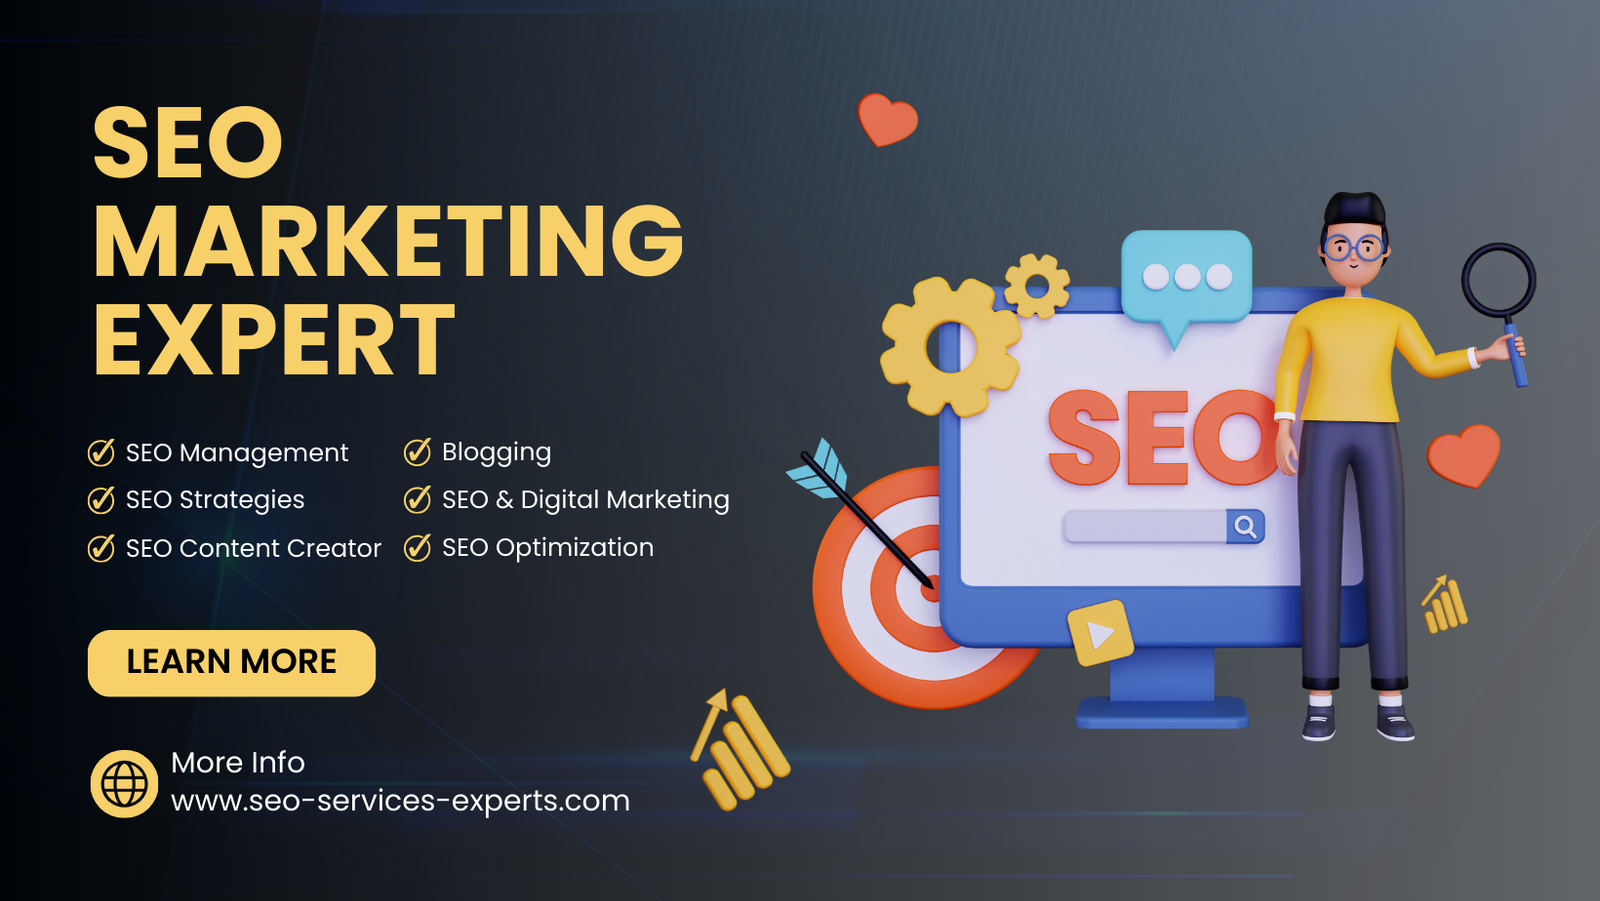 #1 SEO Company in Dubai : SEO Services Dubai, UAE : SEO-Services-Experts.com offers a range of SEO services, including keyword research, on-page optimization, technical SEO, link building, content creation, and analytics